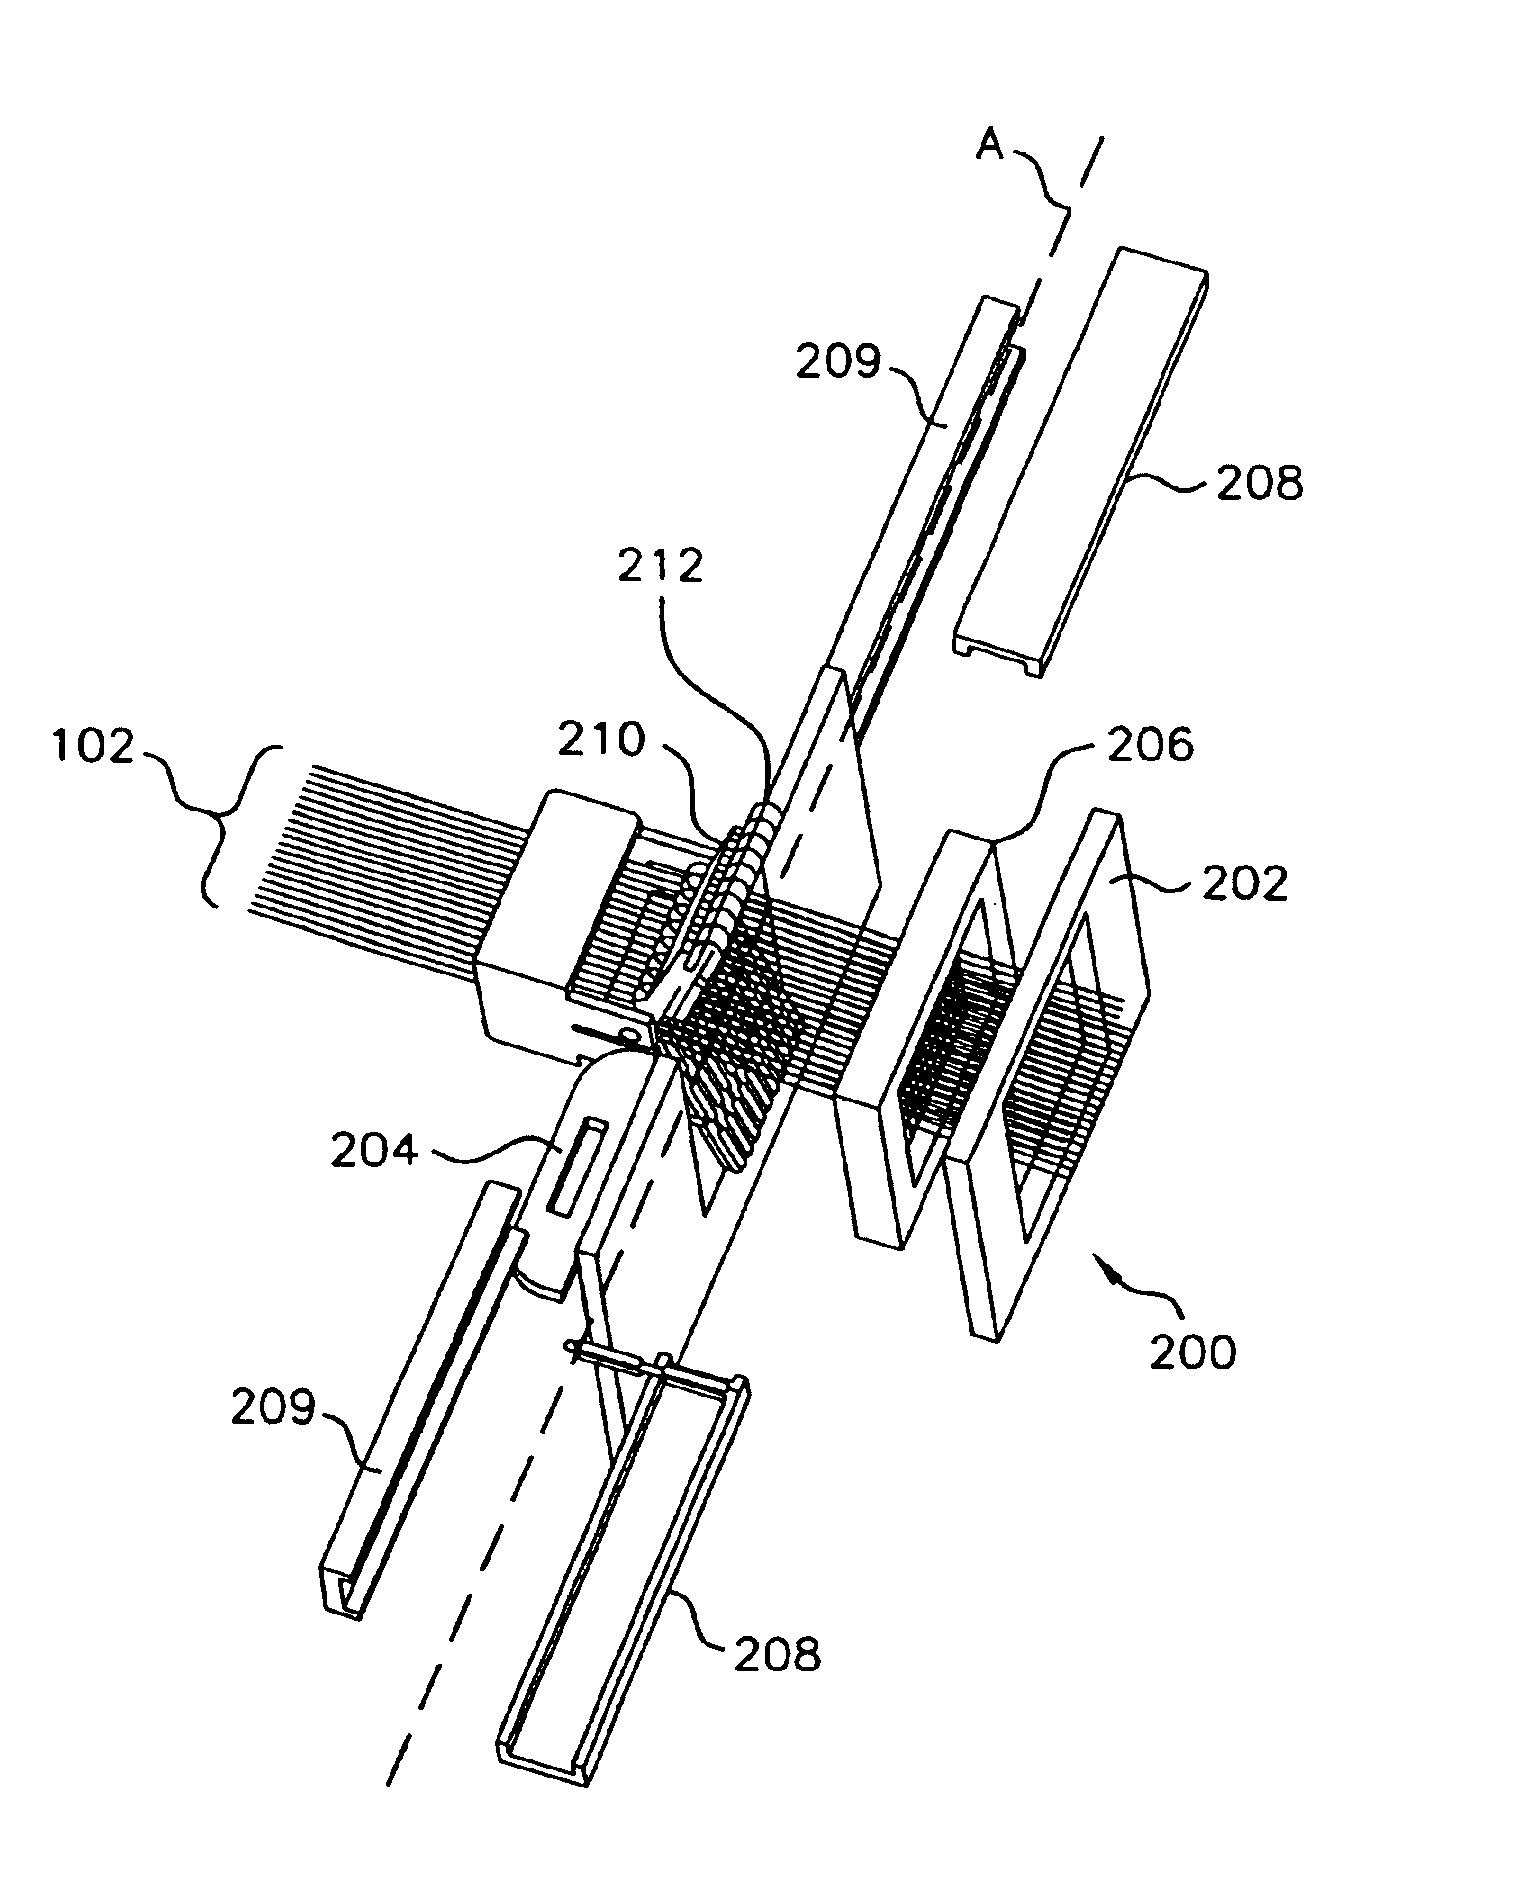 Loom and method of weaving three-dimensional woven forms with integral bias fibers